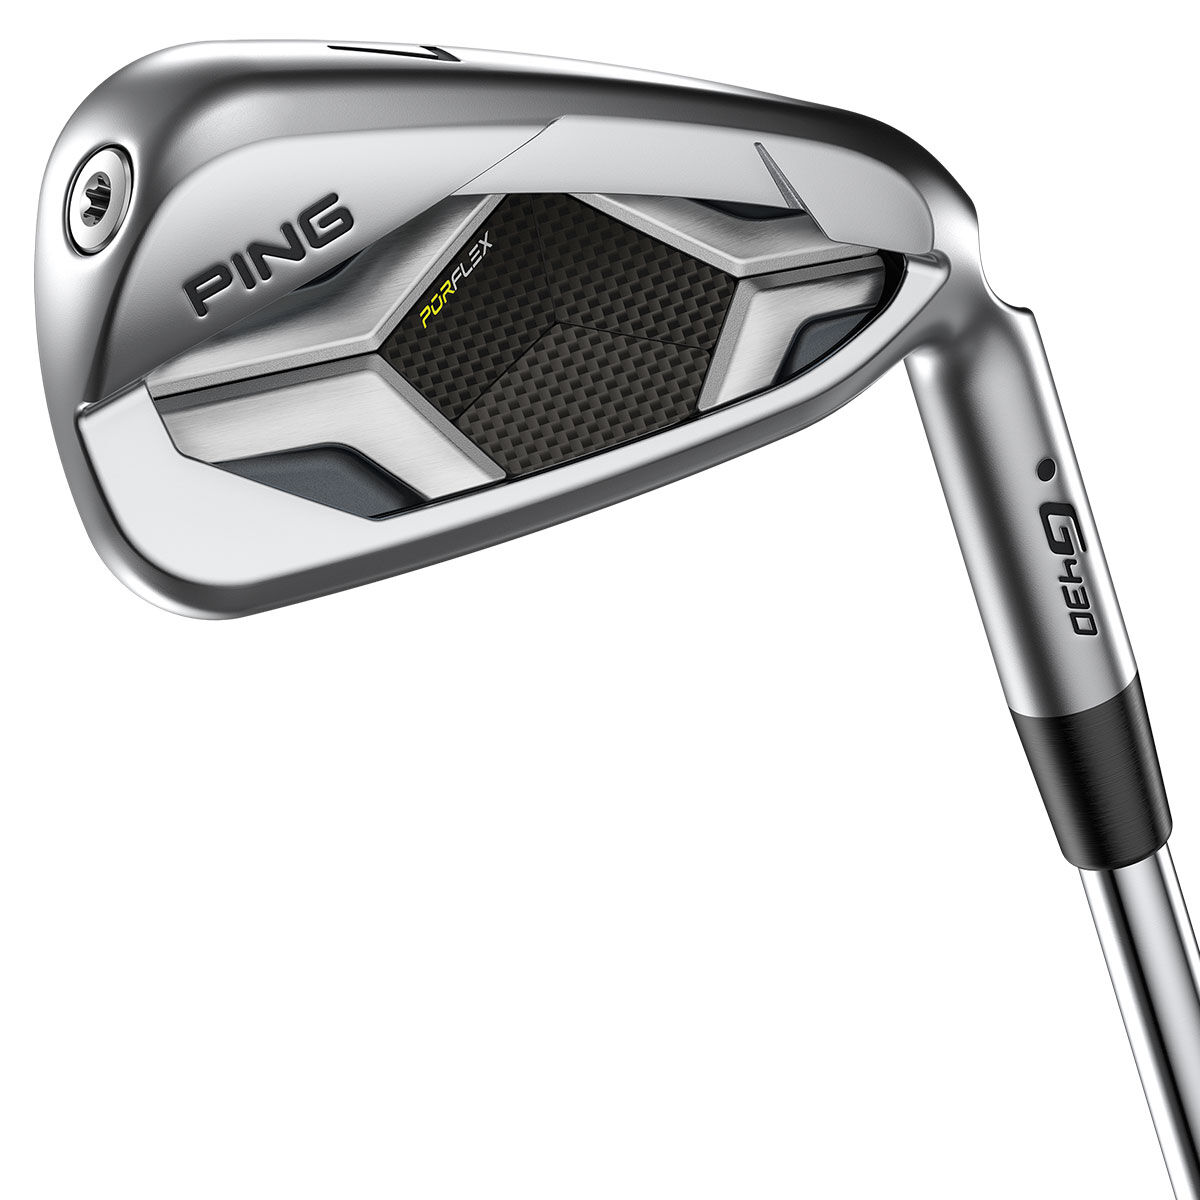 PING Golf Irons, Grey and Black G430 Steel Custom Fit | American Golf, One Size